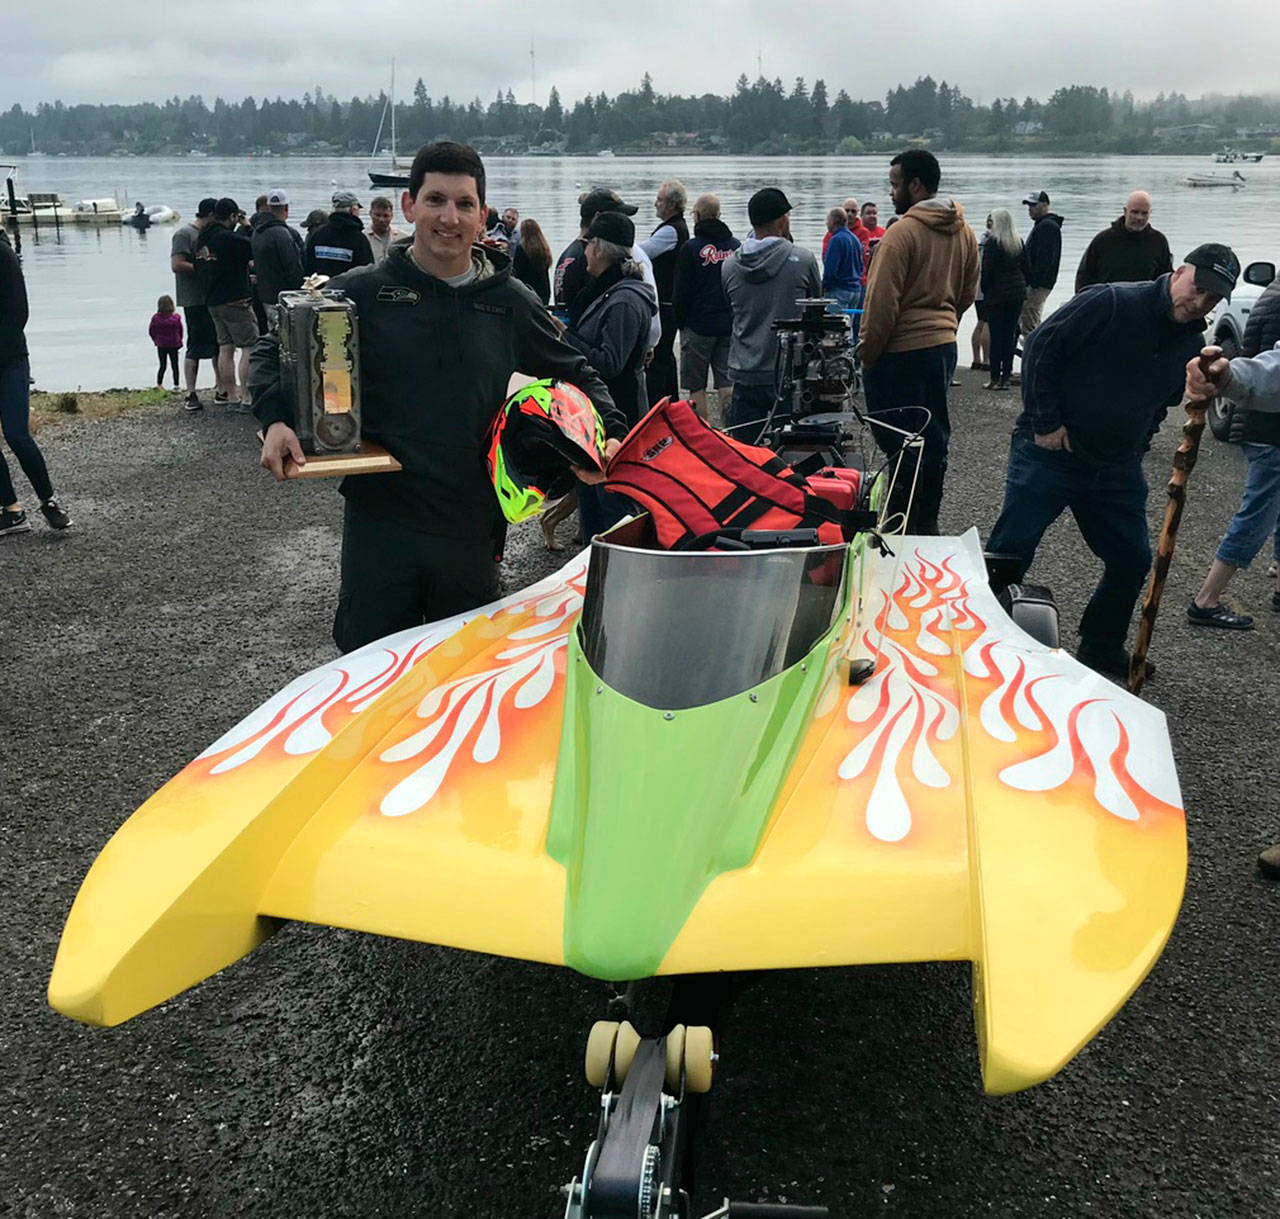 Hydroplane tradition sees old, new racers on water